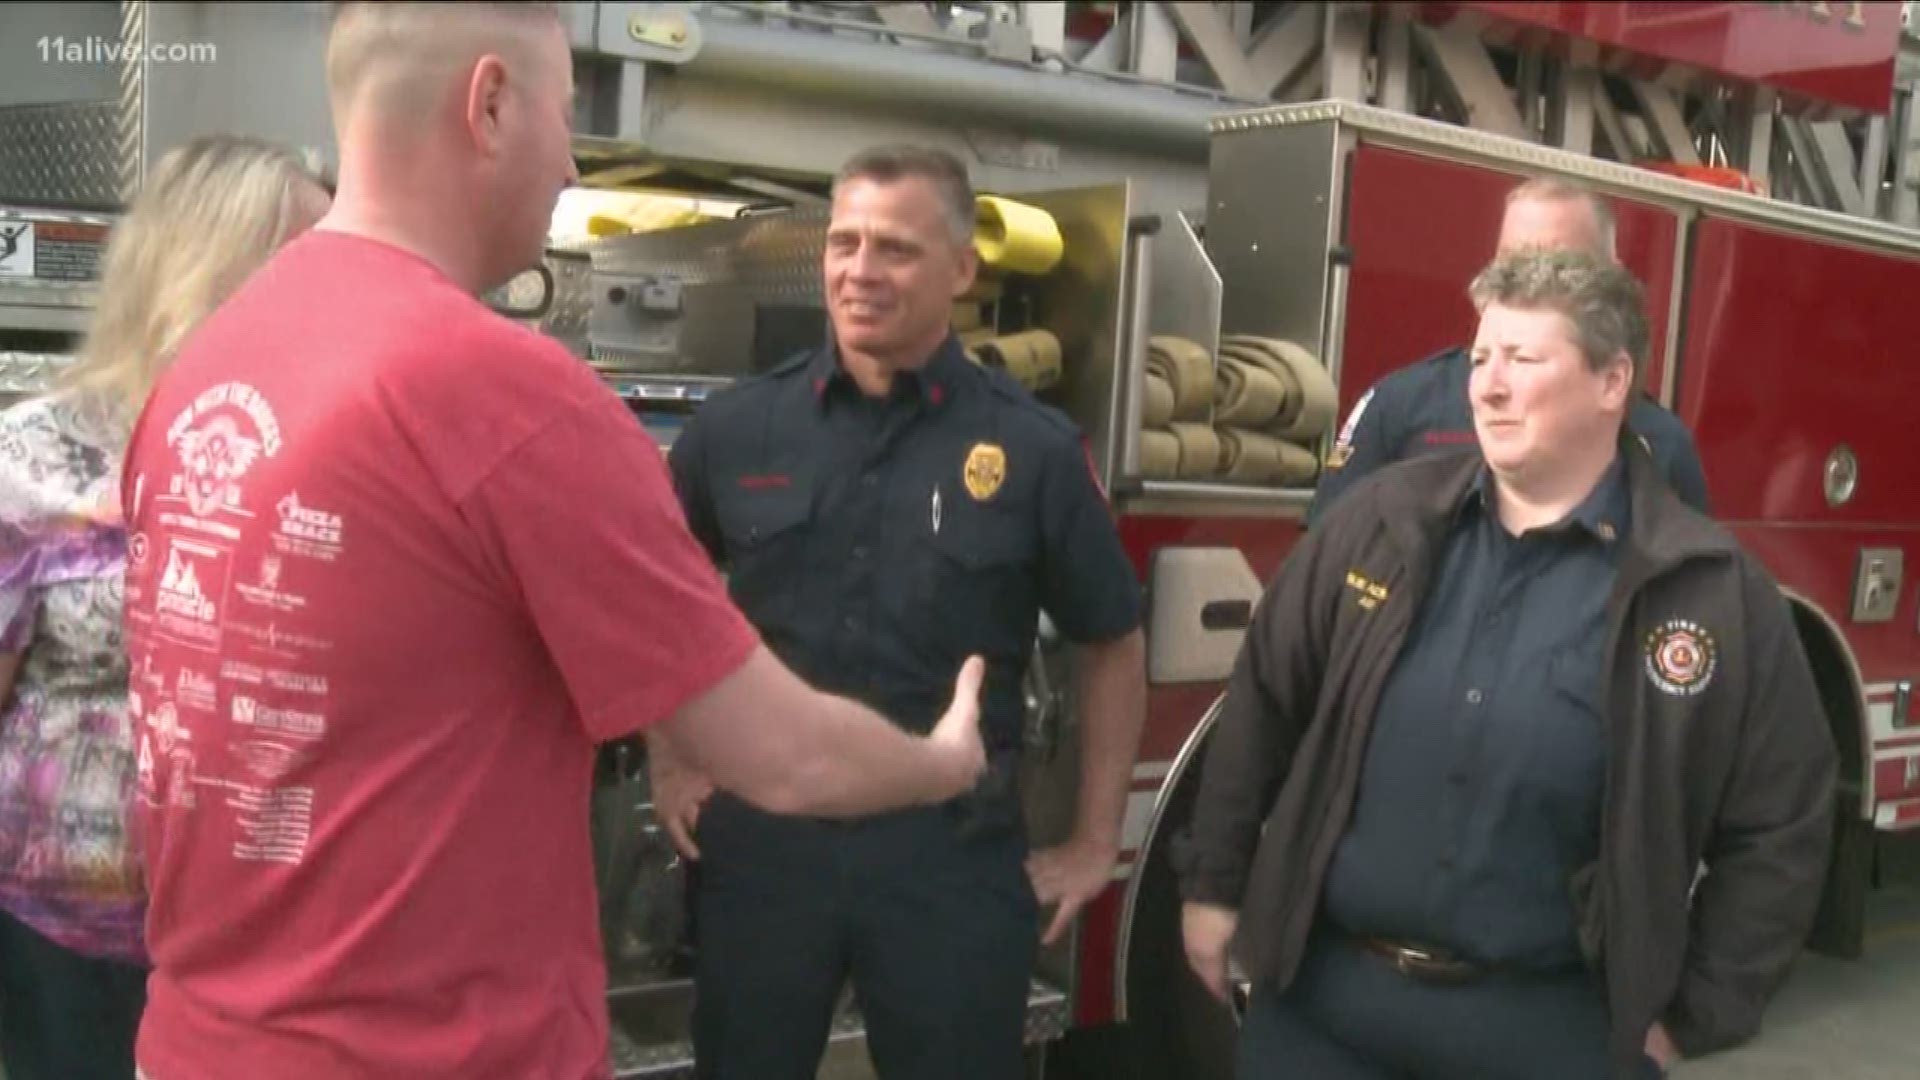 Dan Davis never got the chance to thank the Cobb firefighters who saved him - until the day he met a member of the same department by chance during Hurricane Michael Relief Efforts.